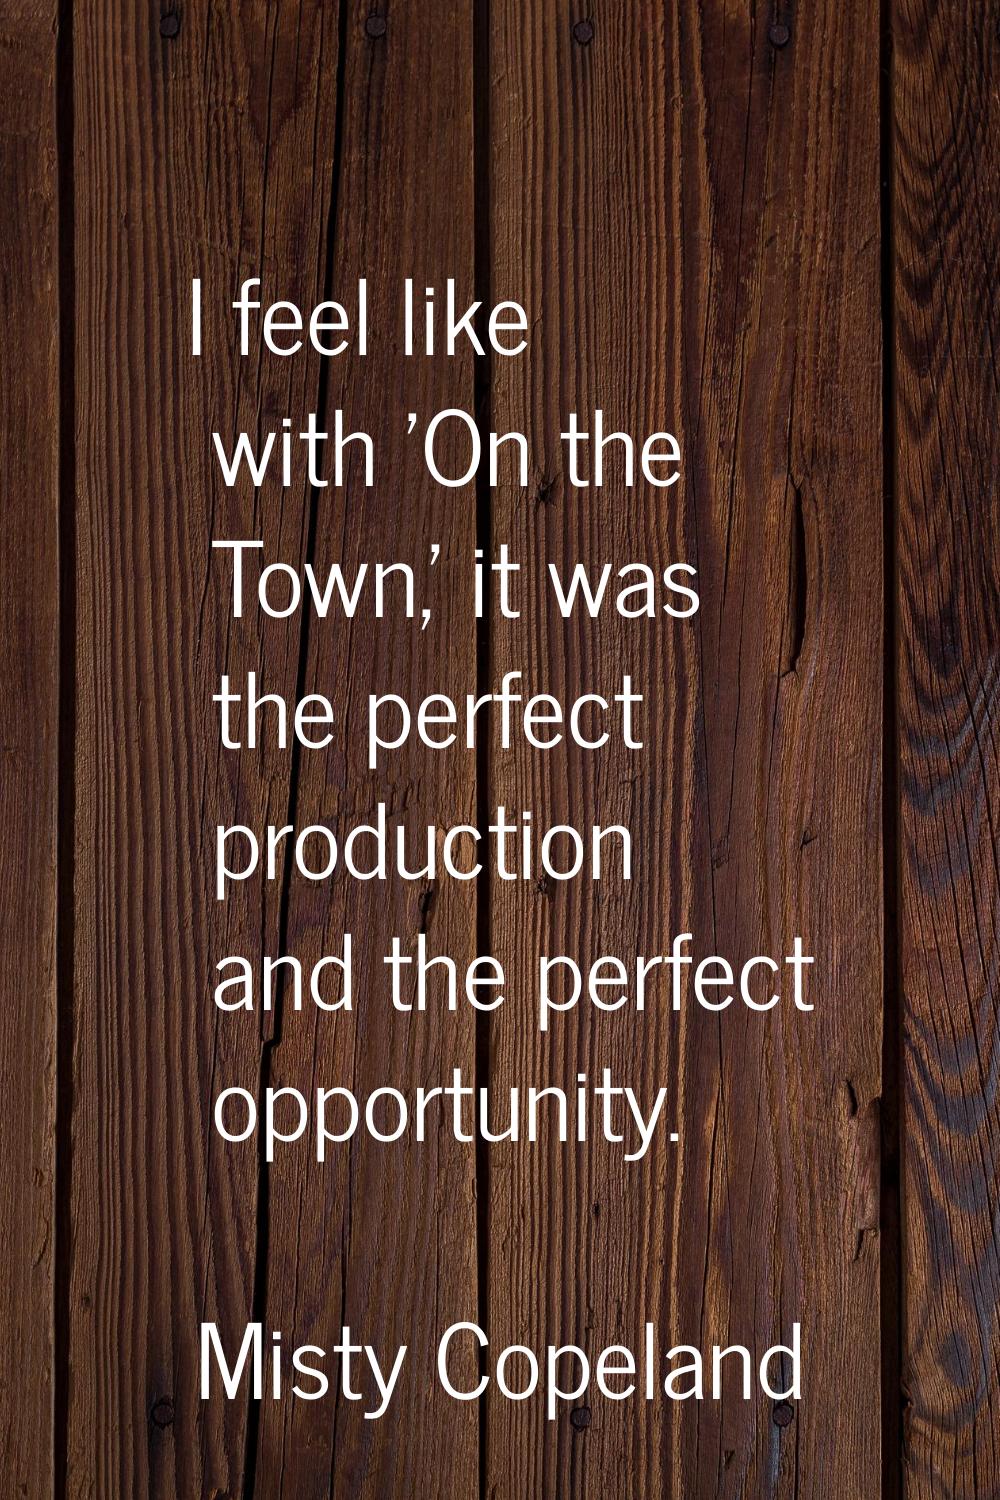 I feel like with 'On the Town,' it was the perfect production and the perfect opportunity.